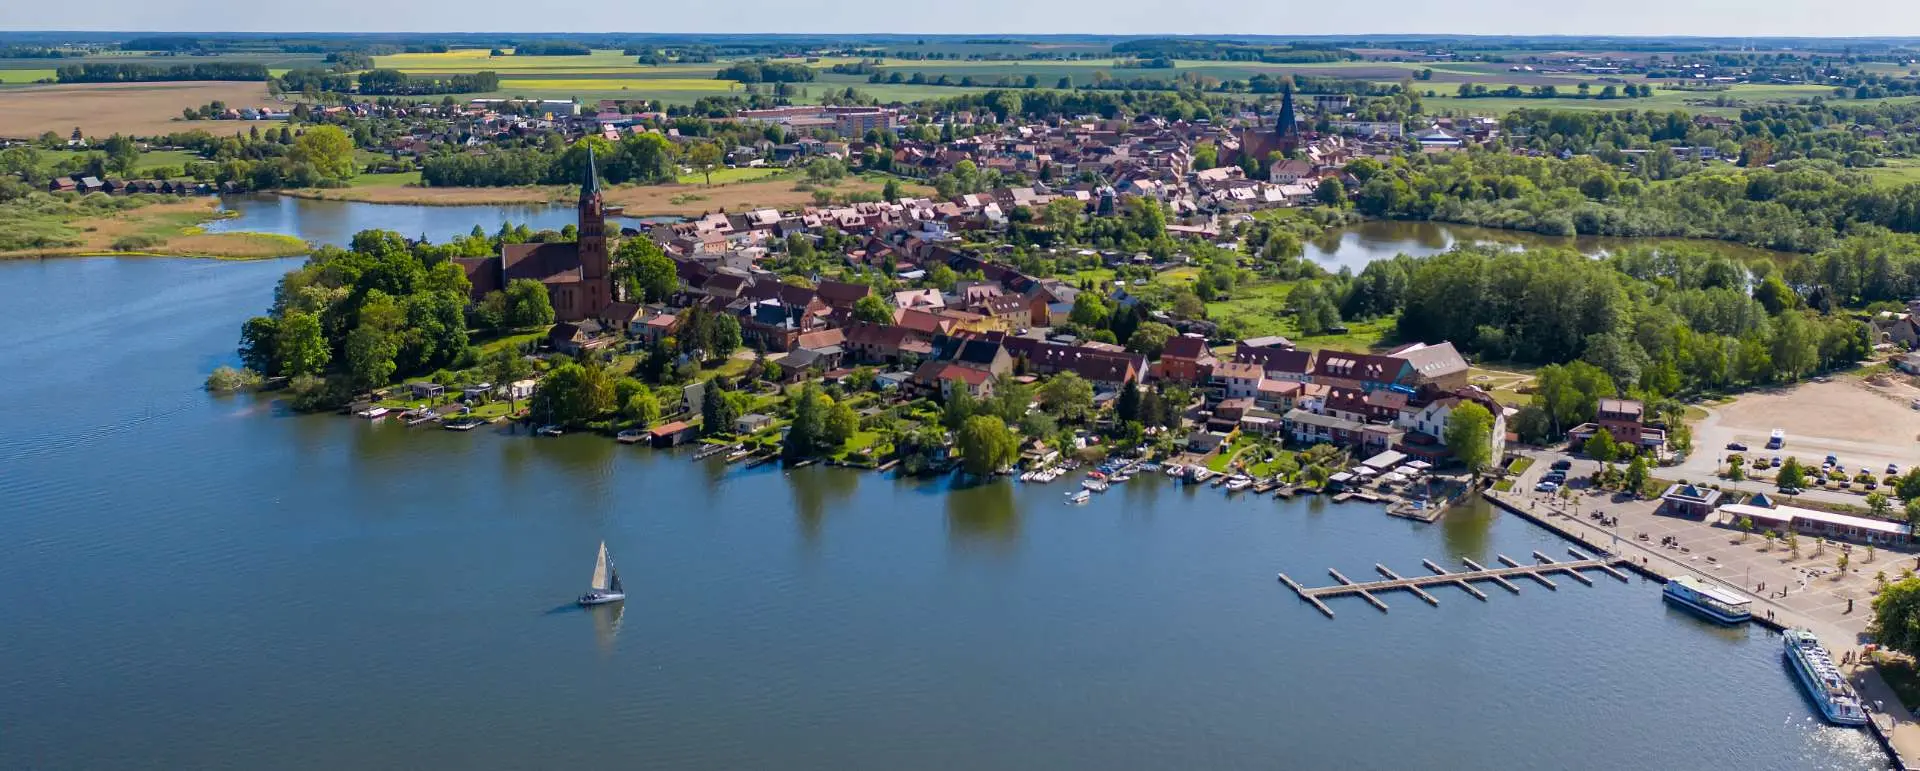 Müritz - the destination for workers